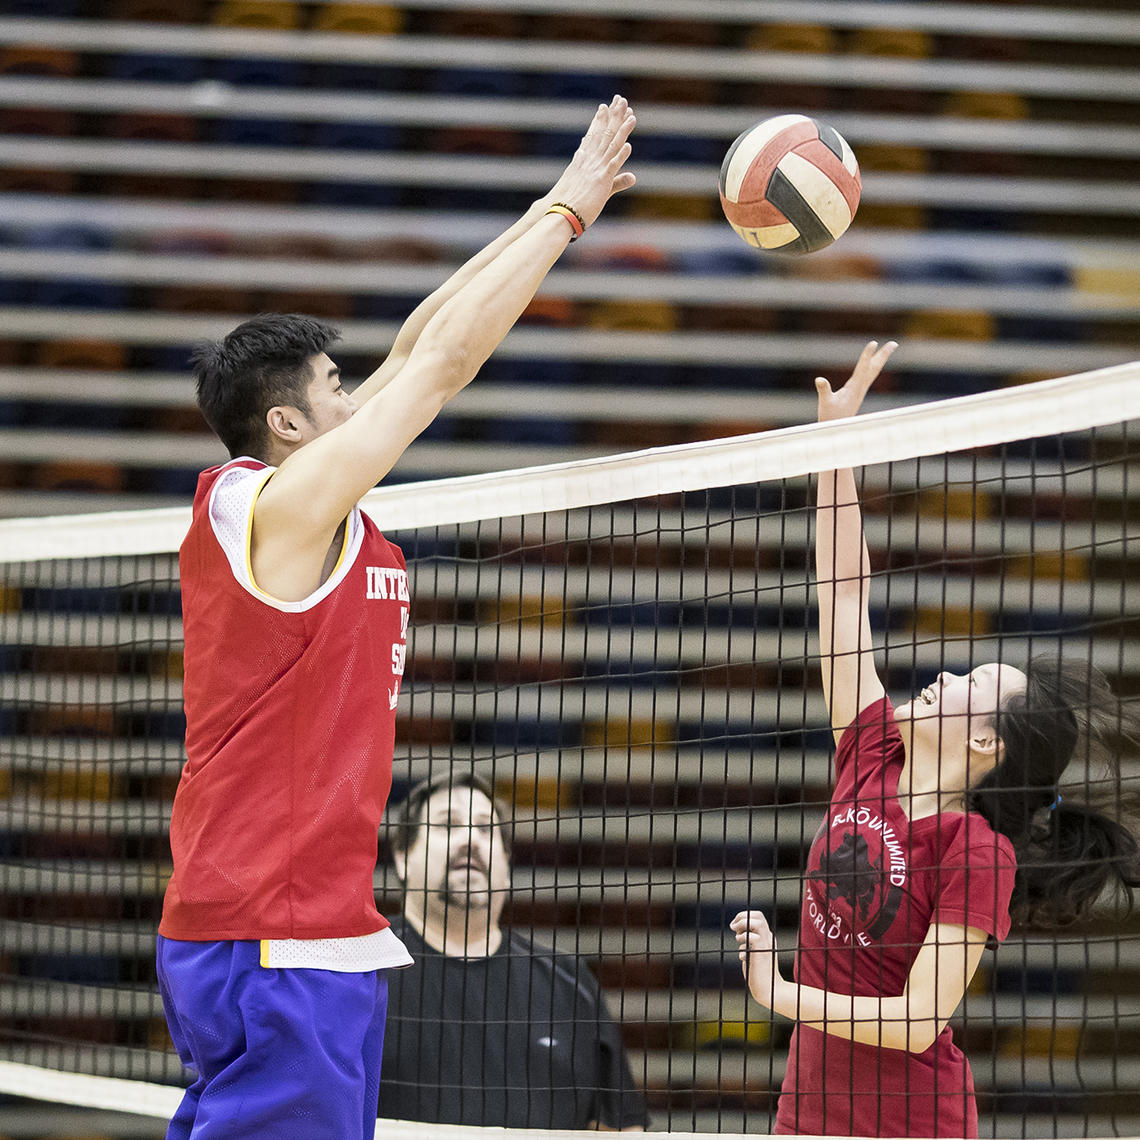 Volleyball Intramurals at UCalgary